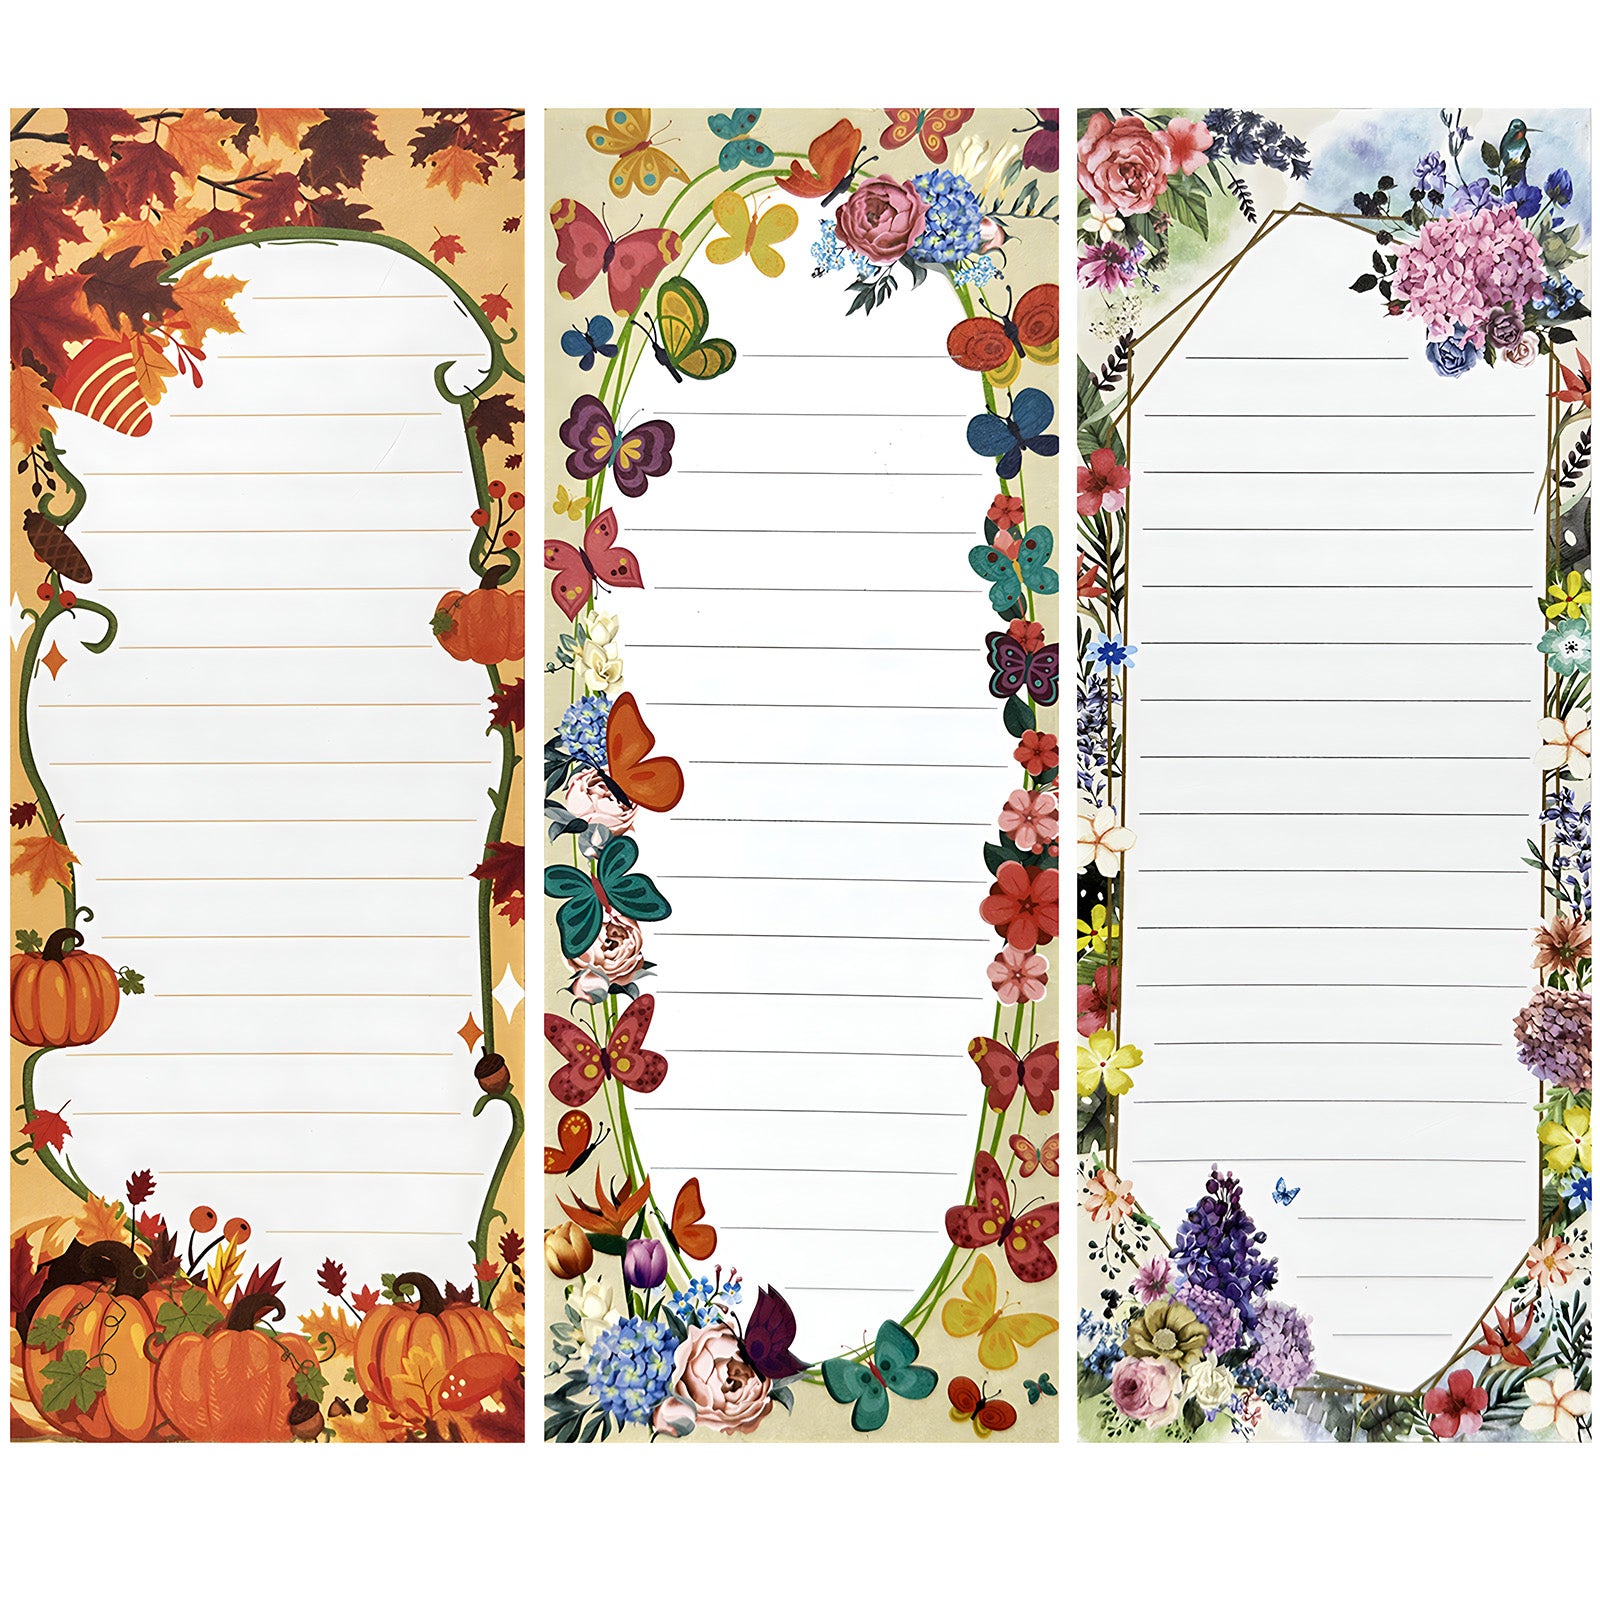 Wrapables Magnetic Notepads for Refrigerator, To-Do lists, Grocery Shopping, Memo, Reminders (Set of 3)